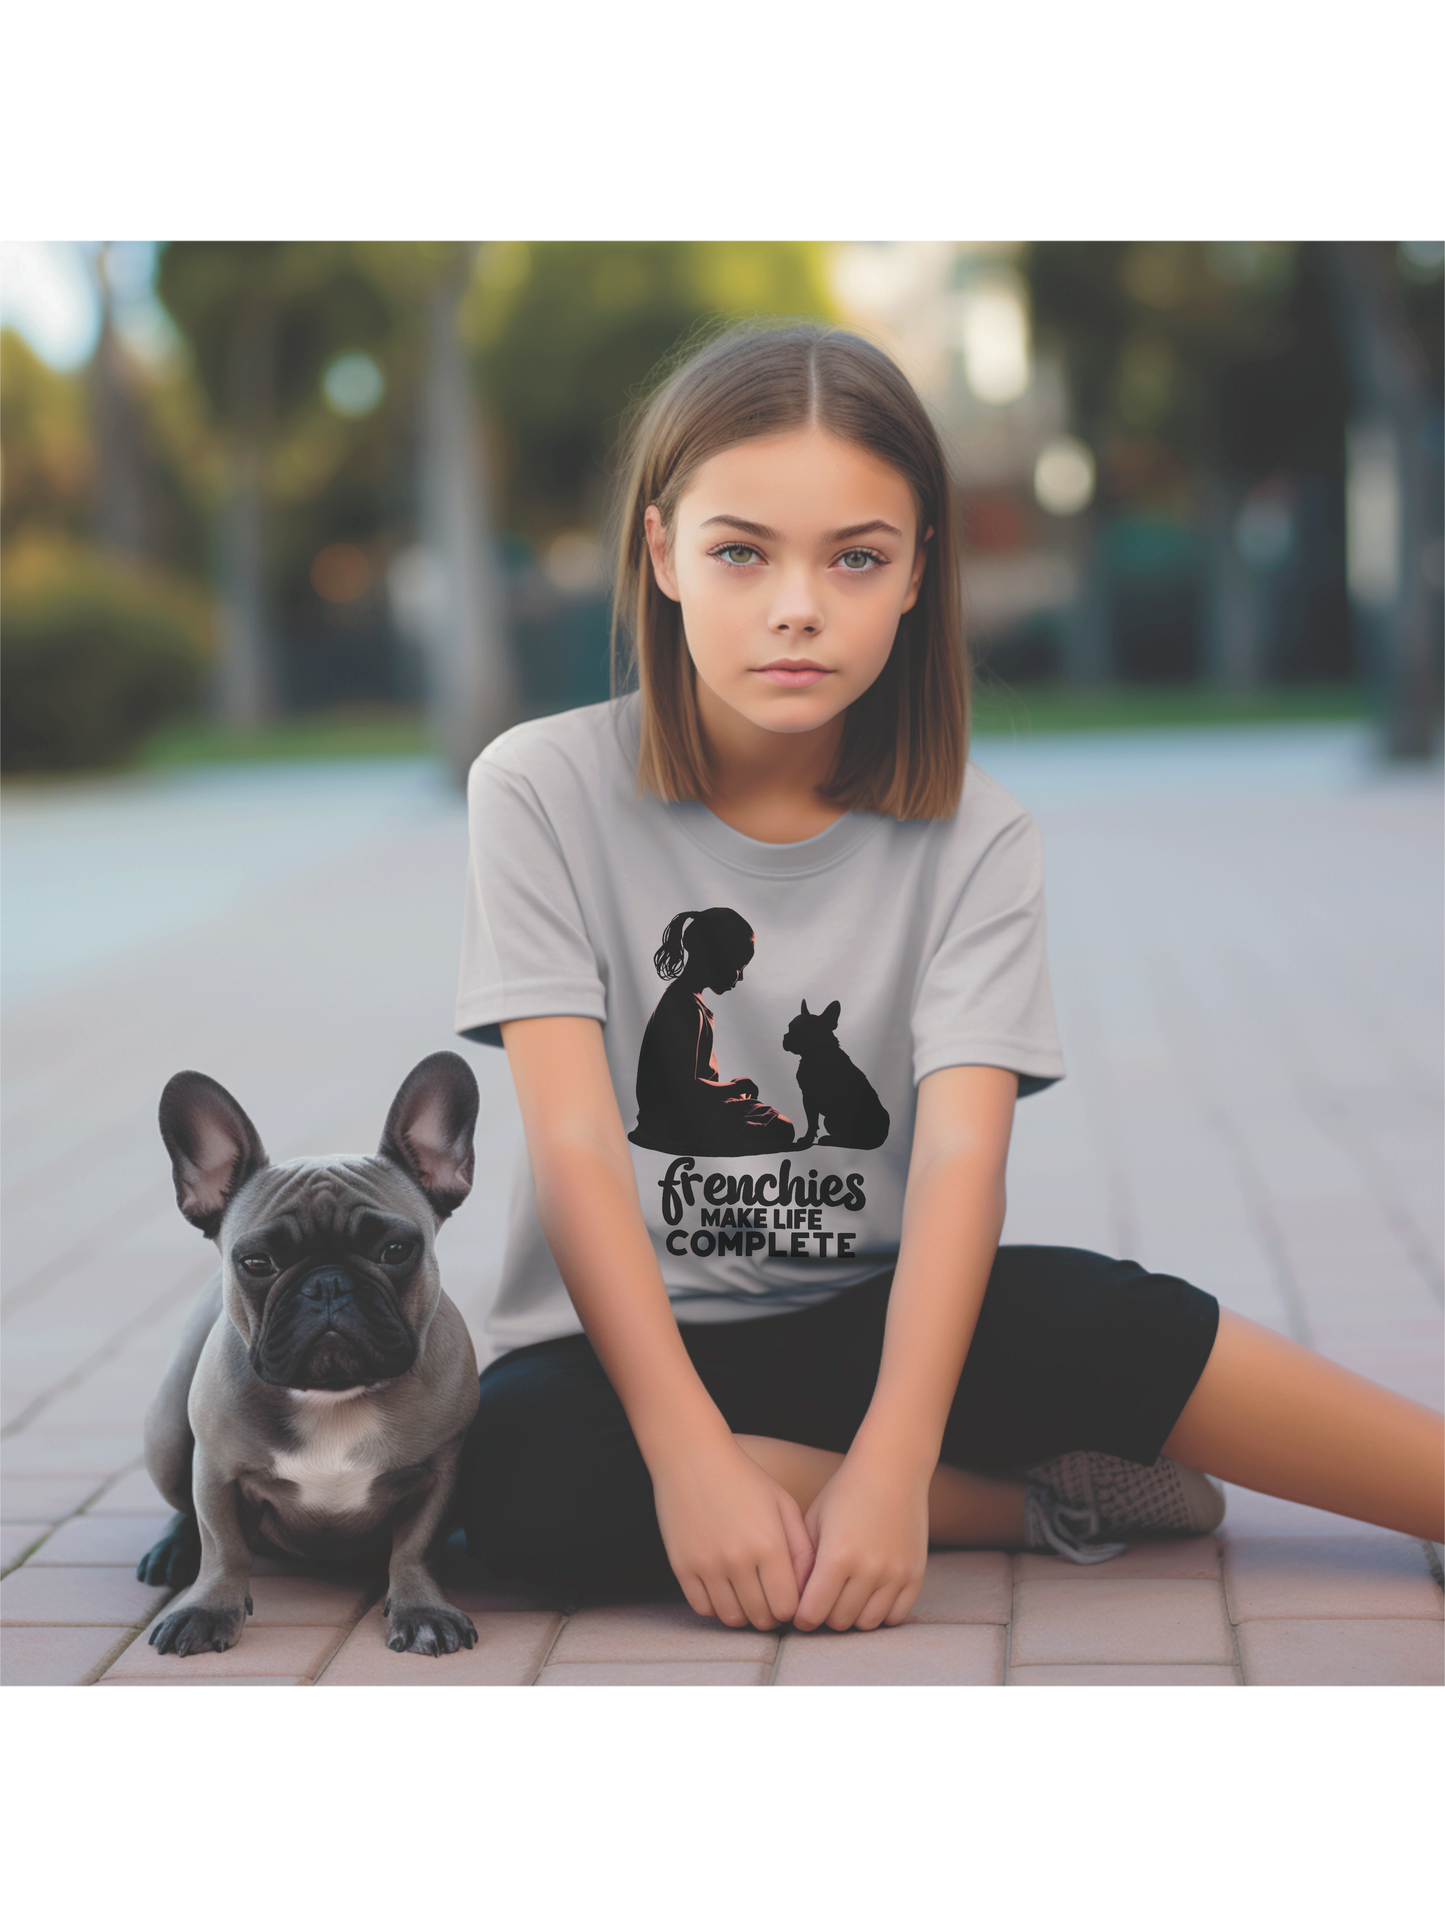 Frenchies Make Life Complete, French Bulldog and Girl Silhouette, Dog Lover